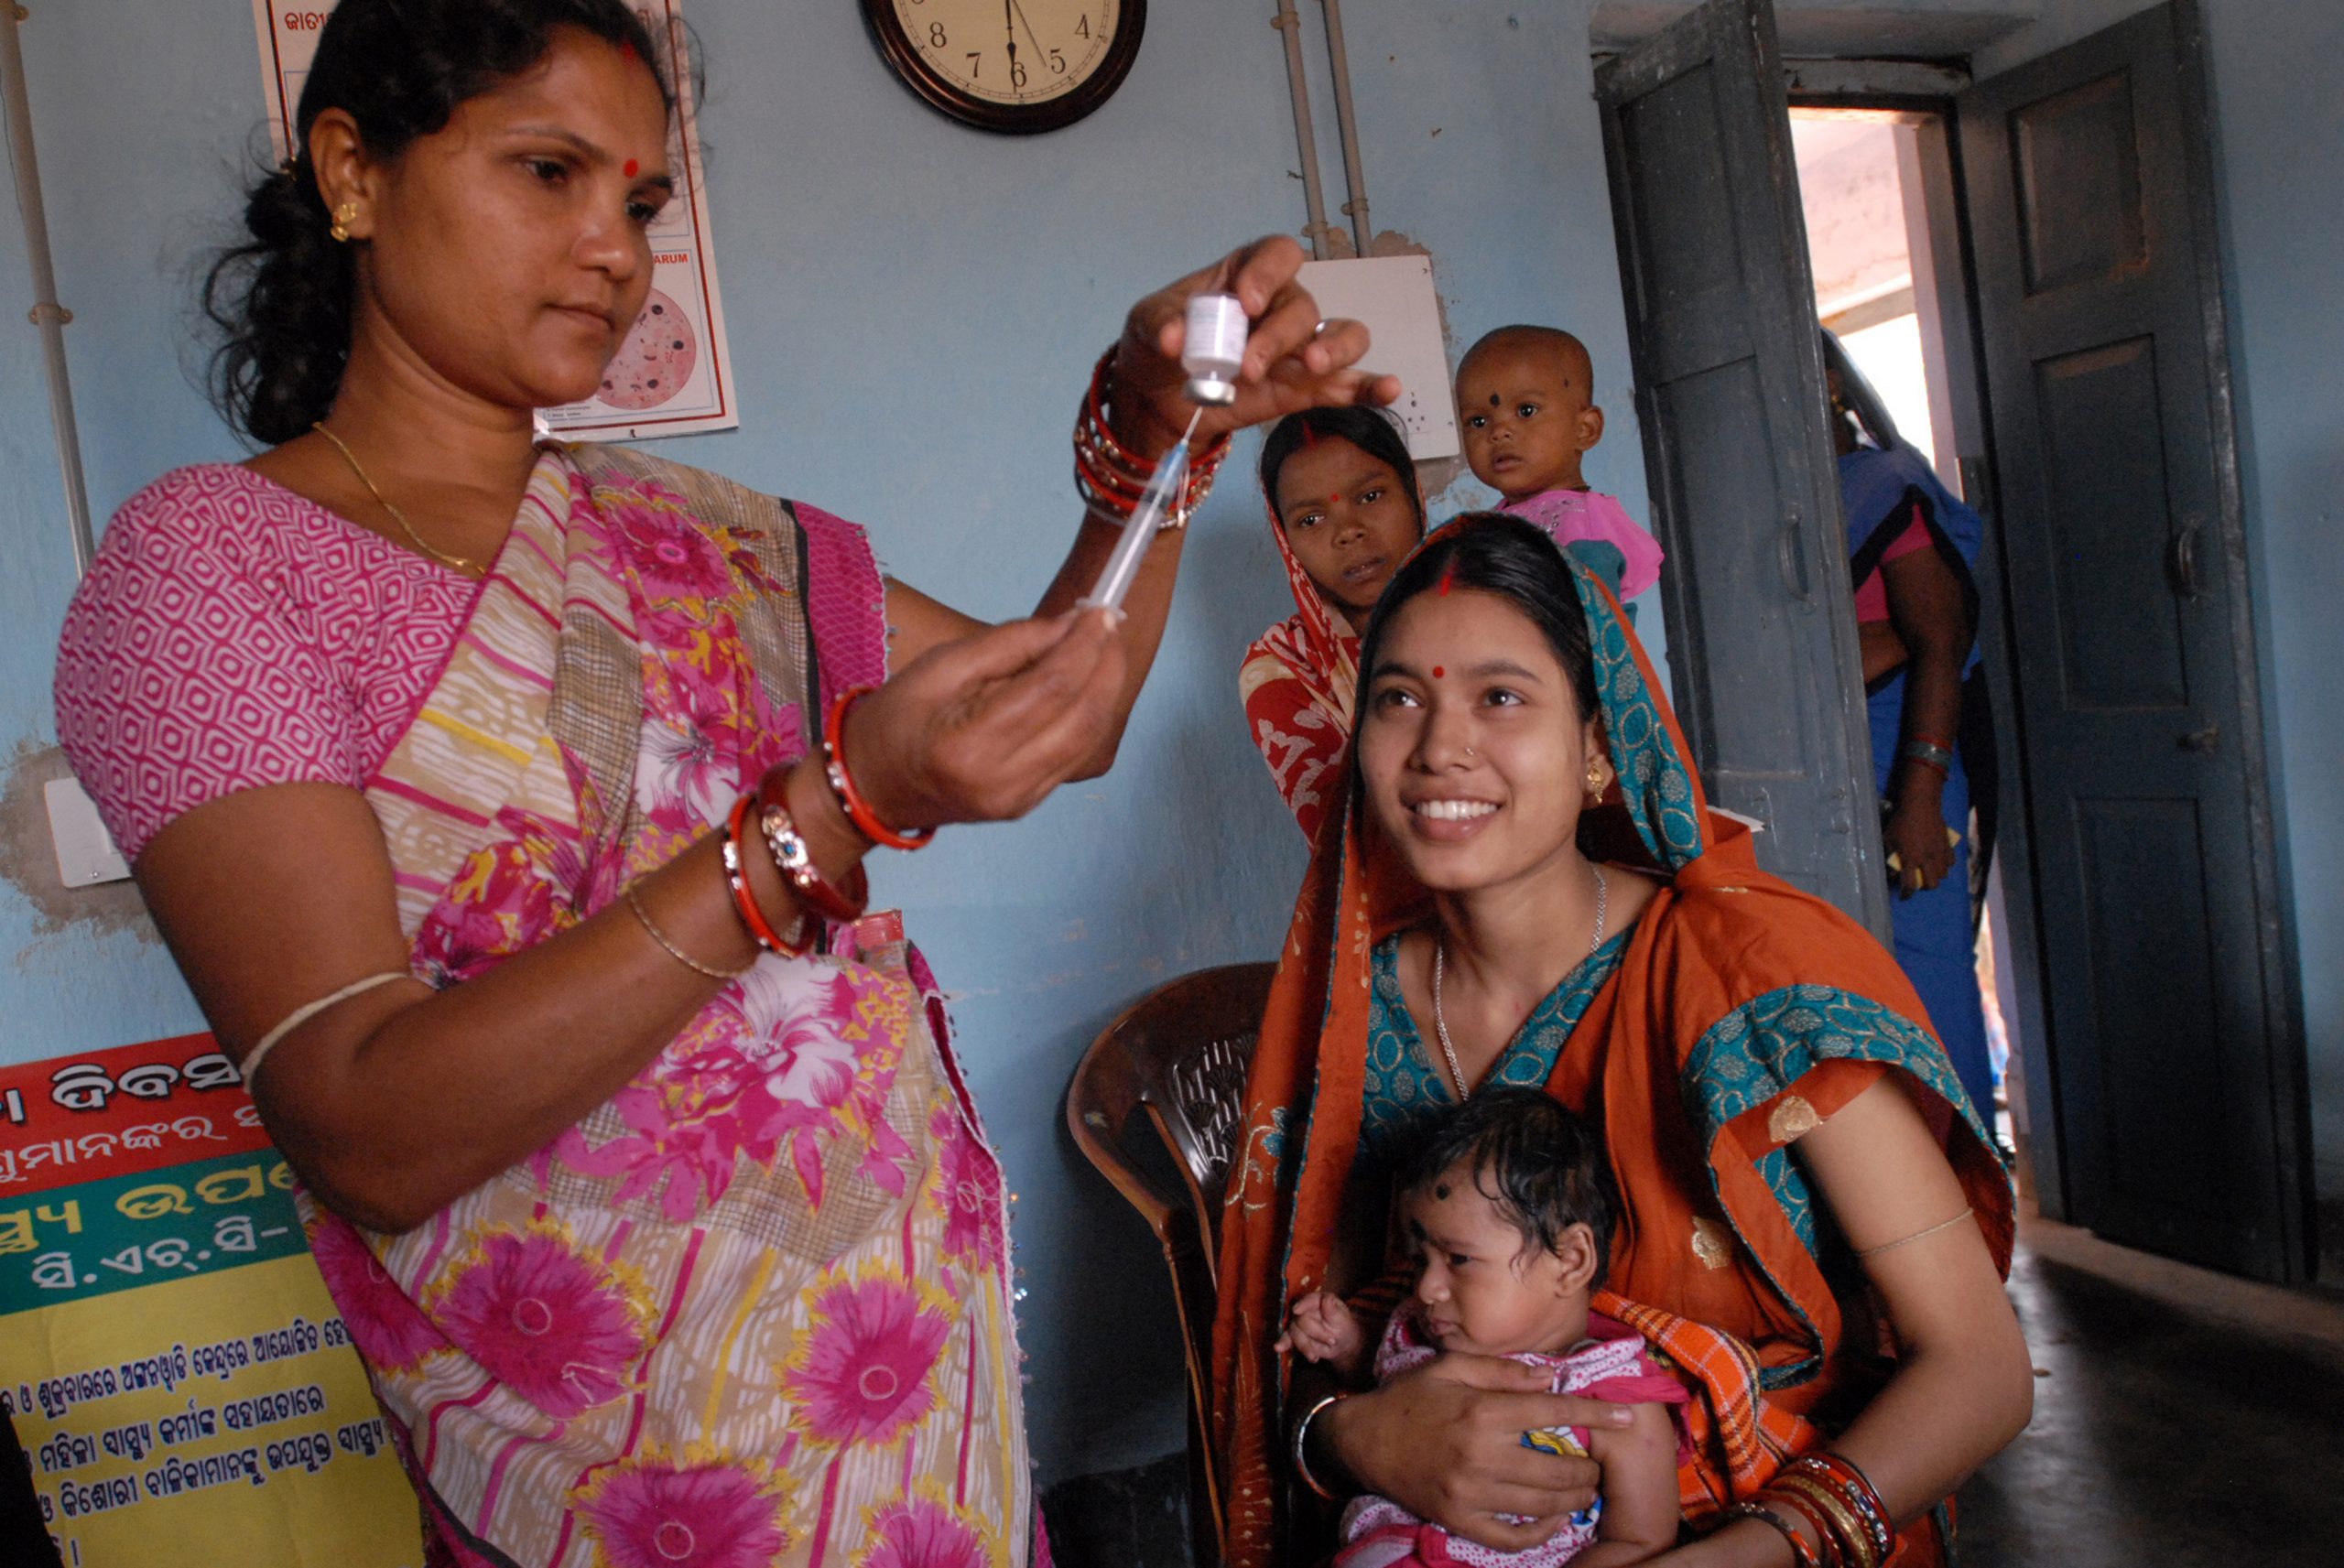 Standing Indian woman files a syringe while a seated mother and her baby look on